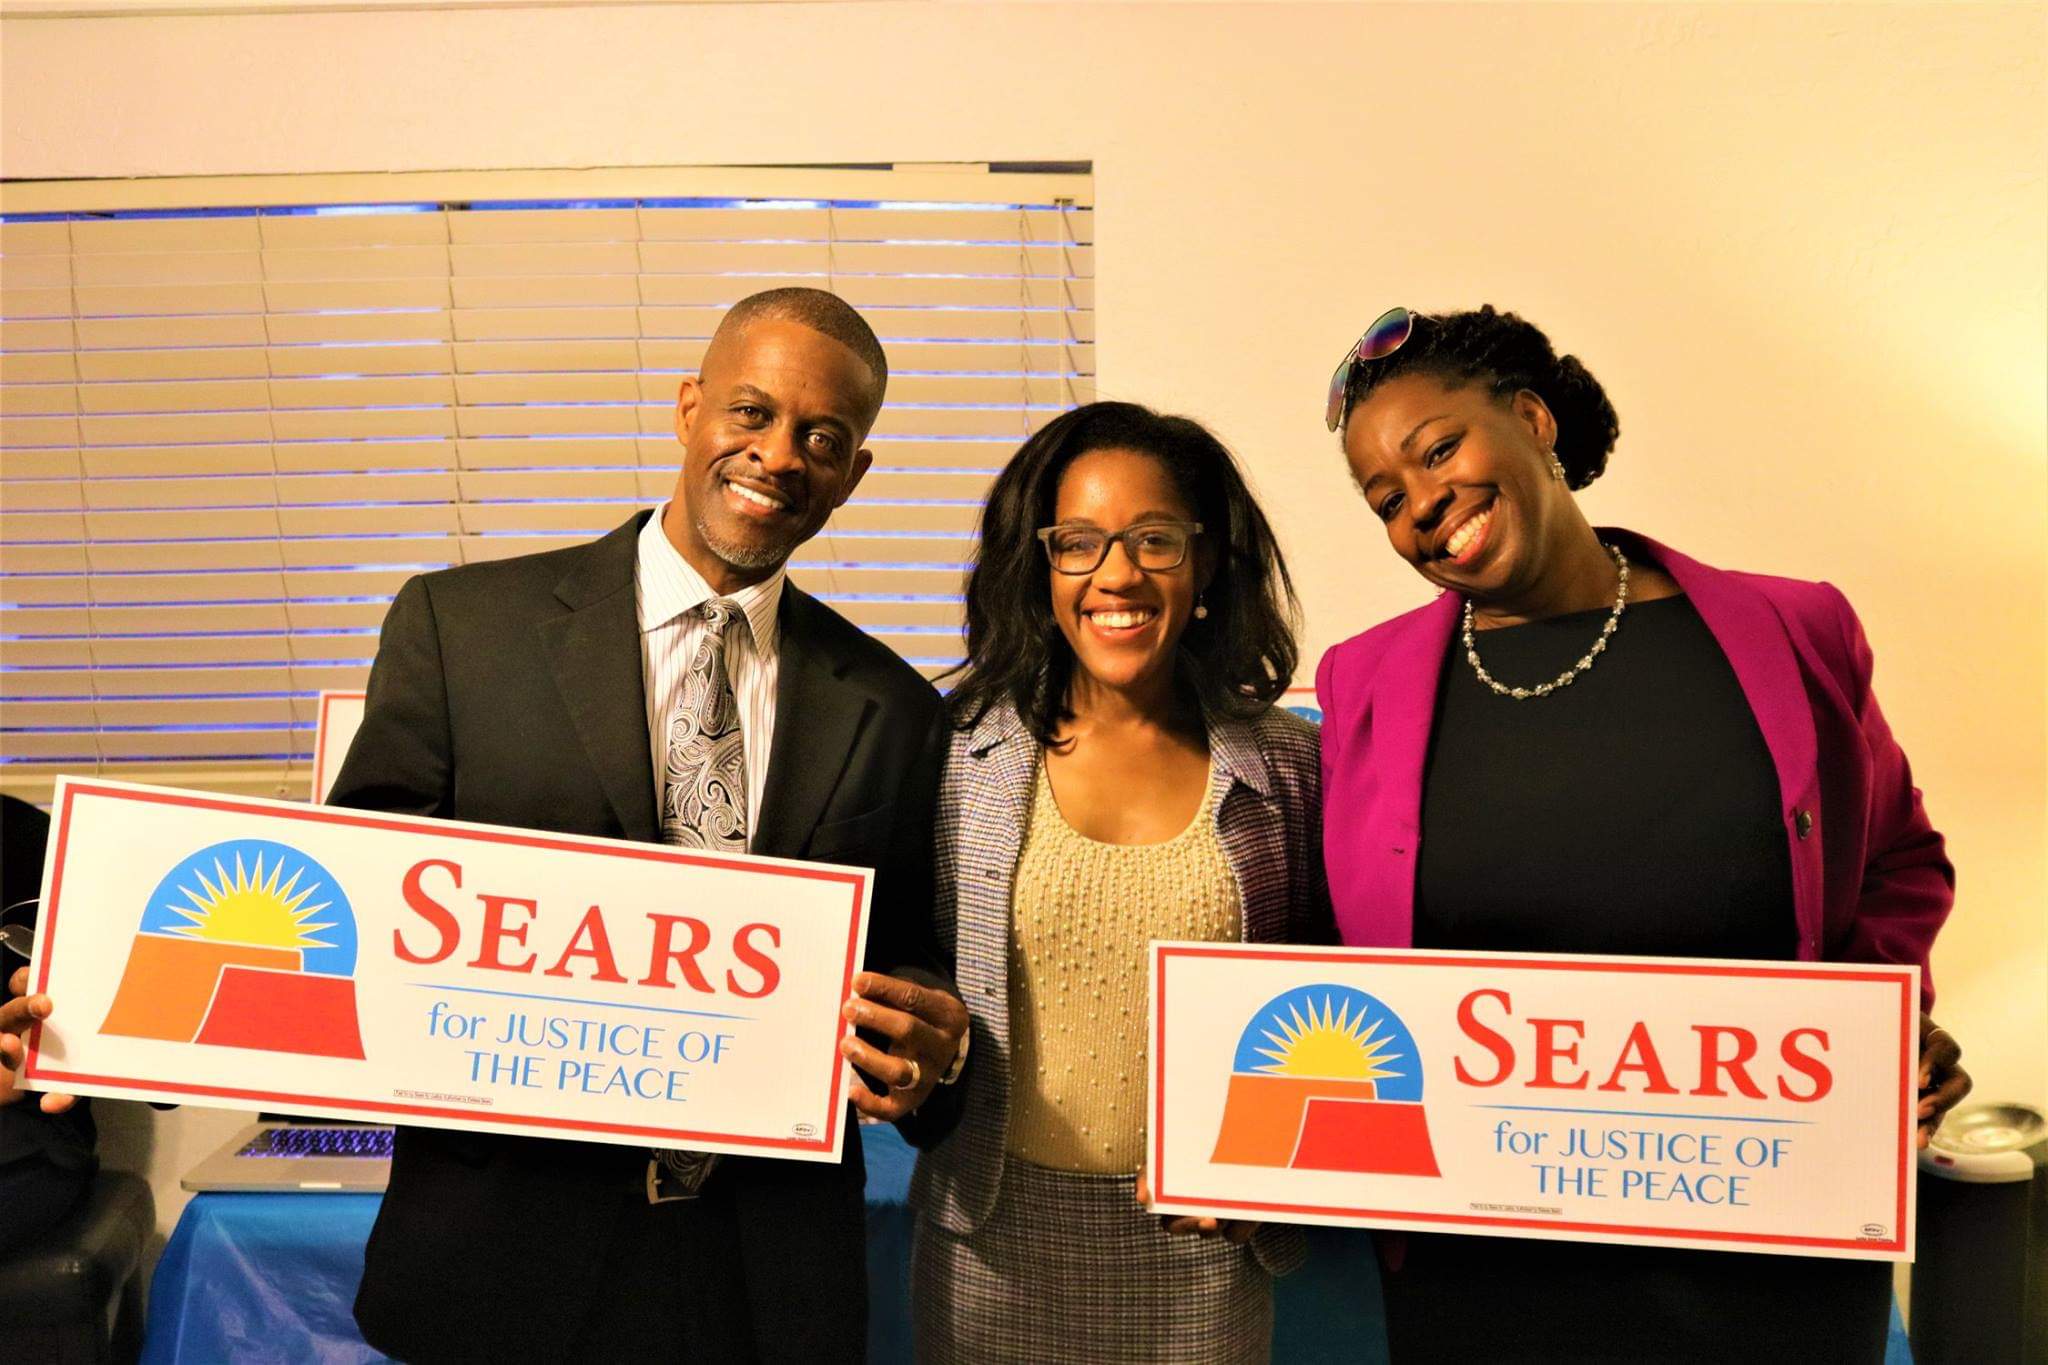 Elaissia Sears poses with her parents after her winning election to become a Justice of the Peace for the West Mesa Justice Court in November 2018.